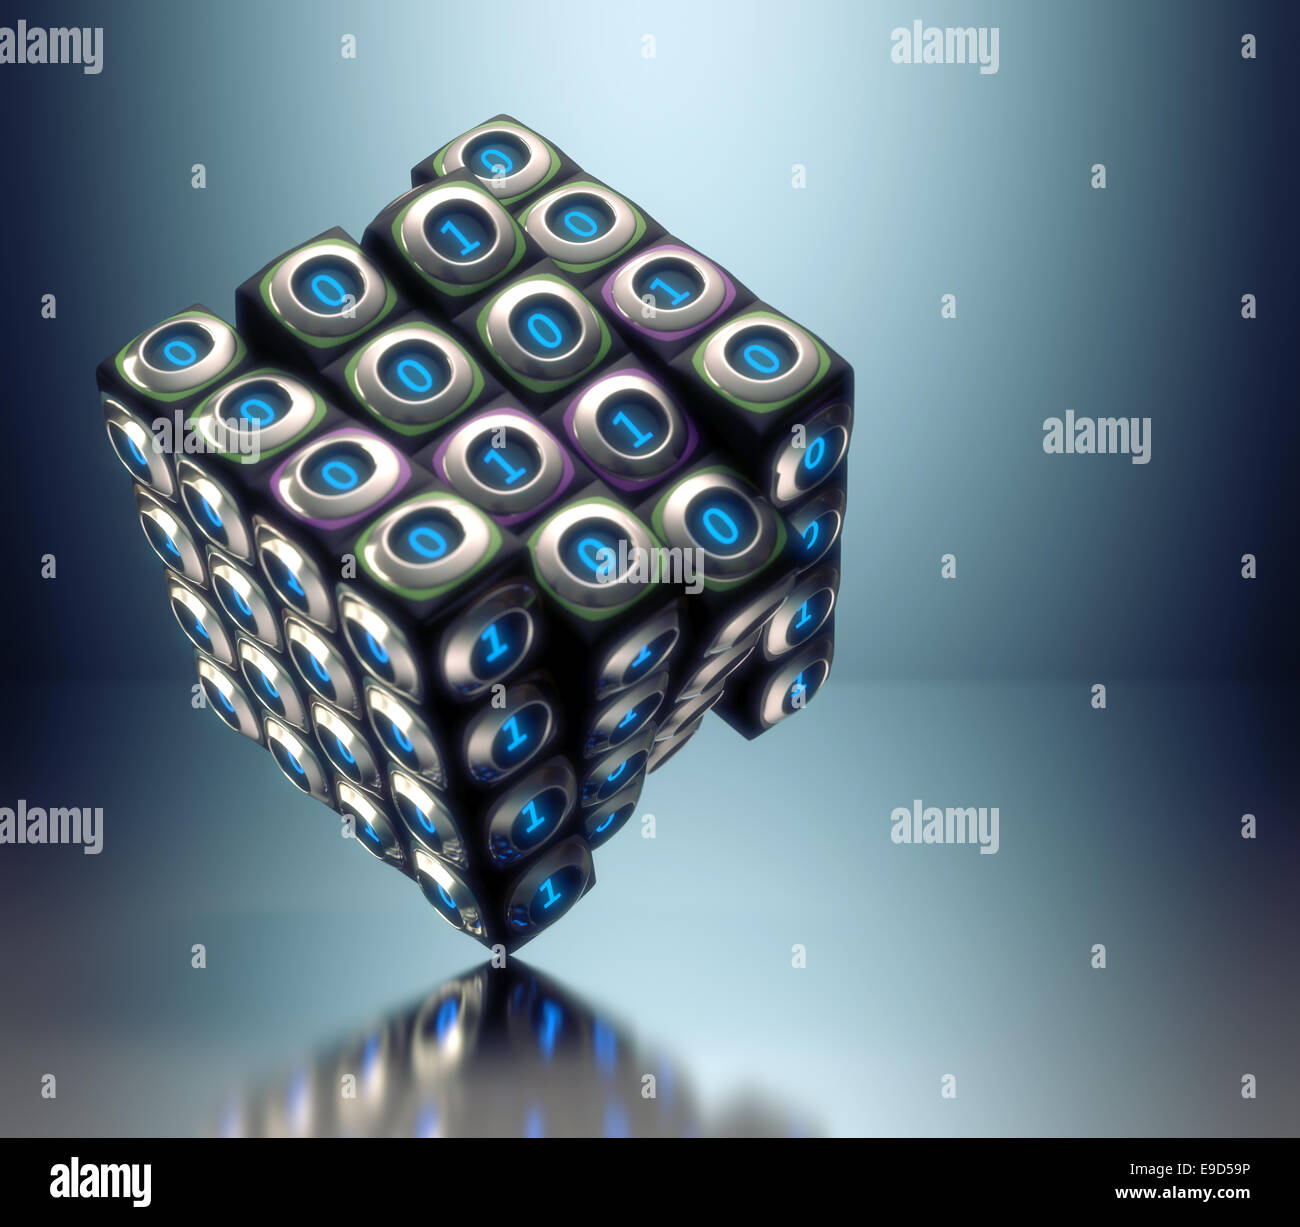 Binary cube concept of digital technology. Clipping path included. Stock Photo